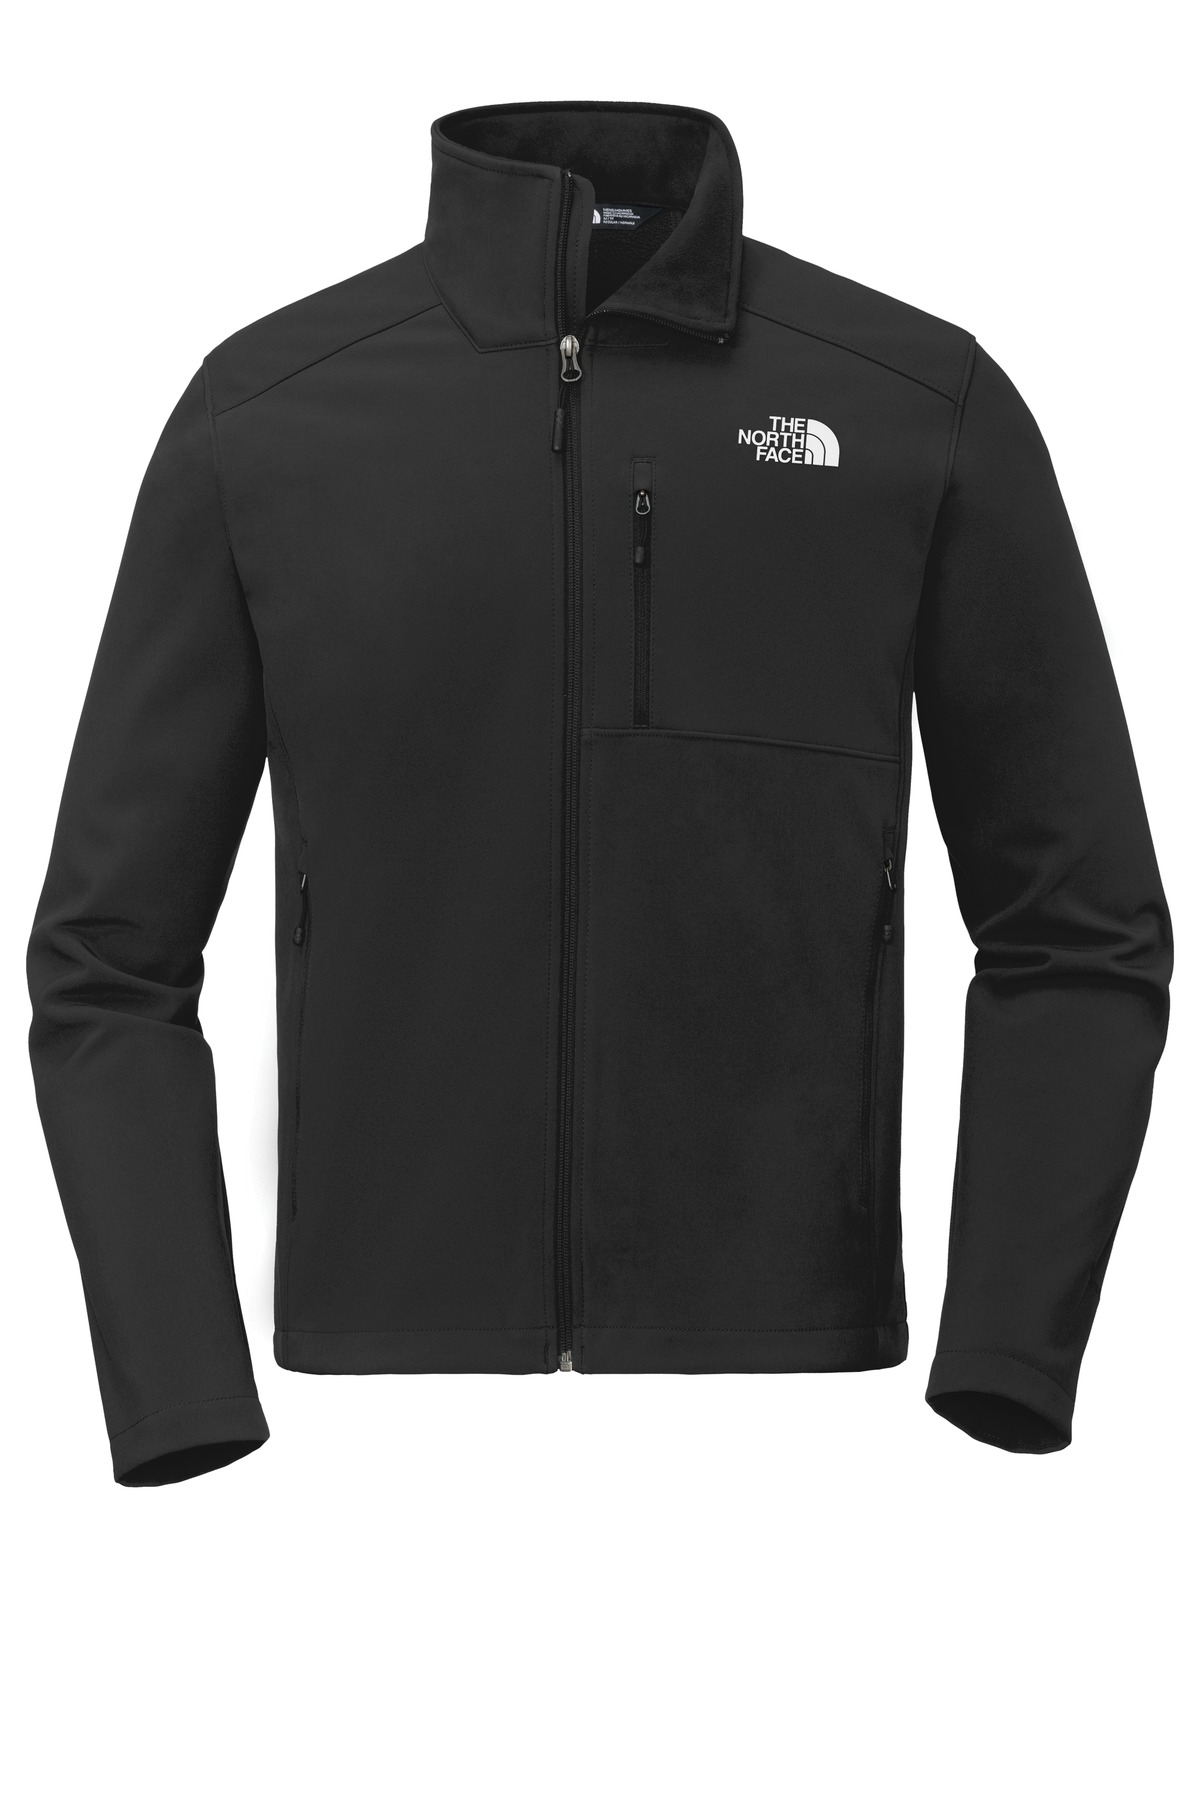 The North Face ® Apex Barrier Soft Shell Jacket. NF0A3LGT - Custom ...